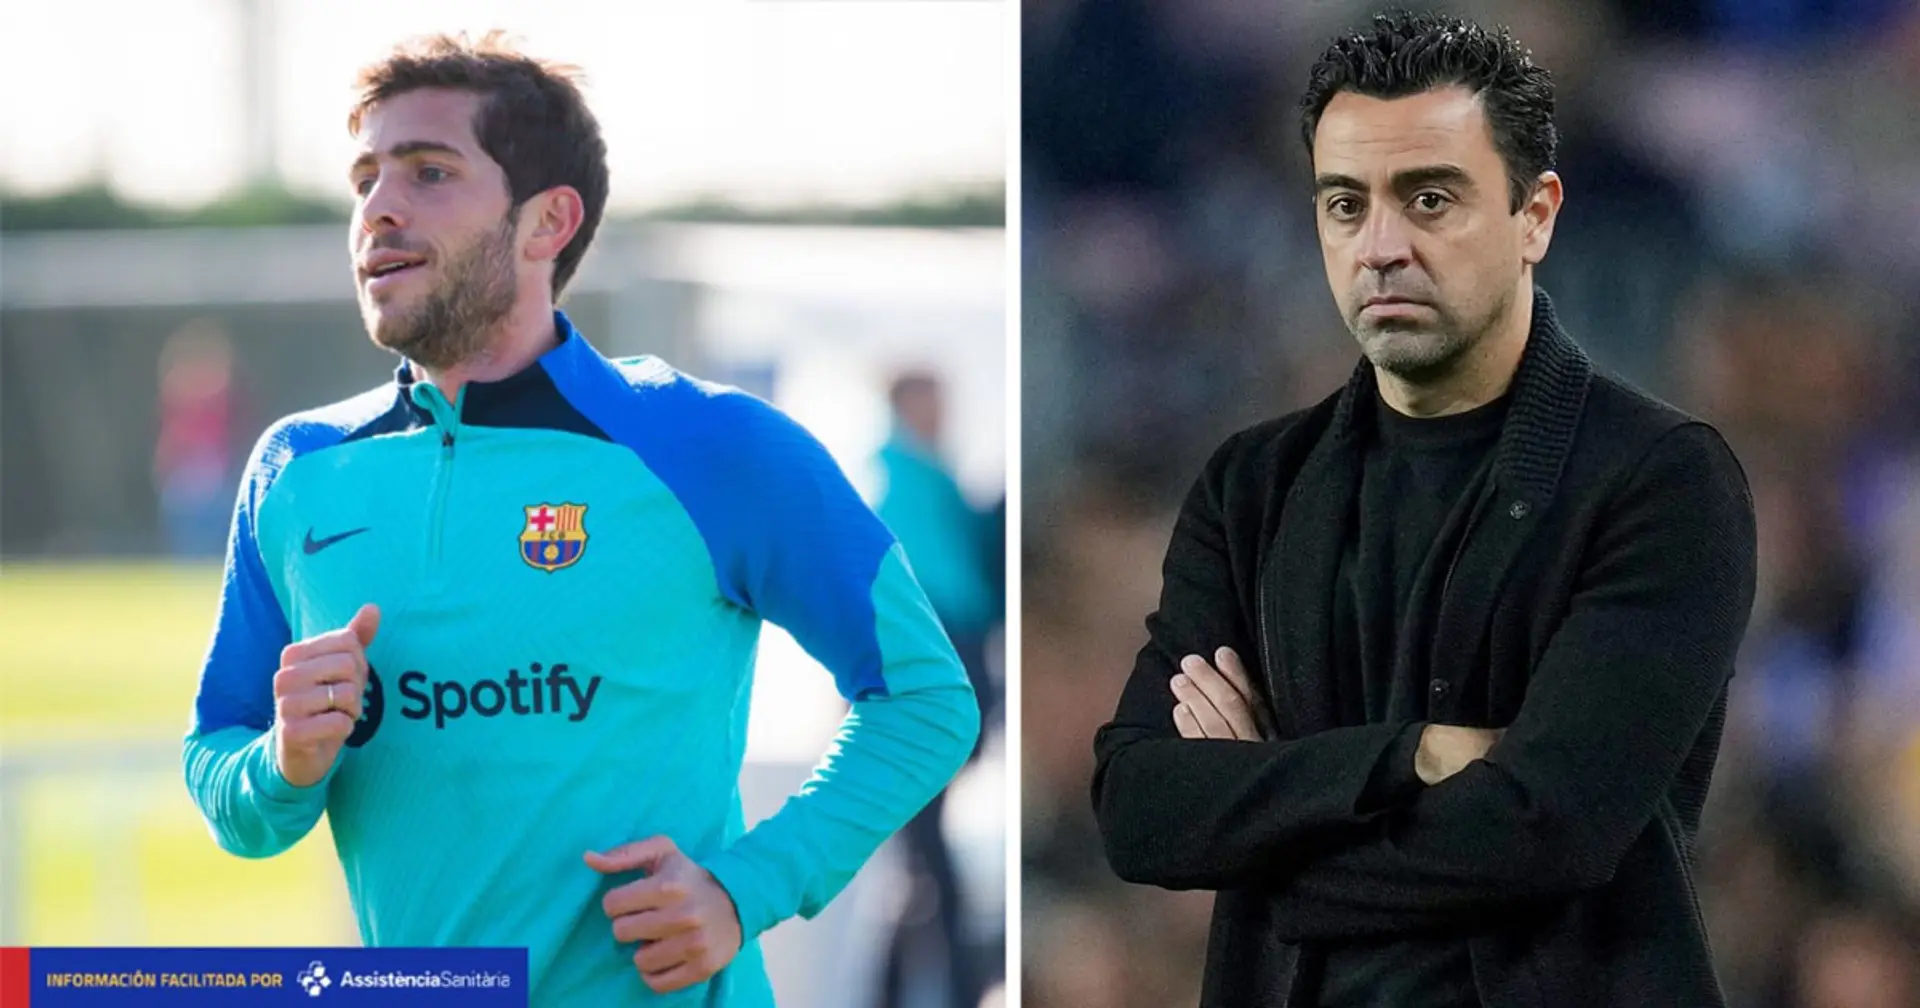 Barca can't find rival for December friendly and 3 more under-radar stories